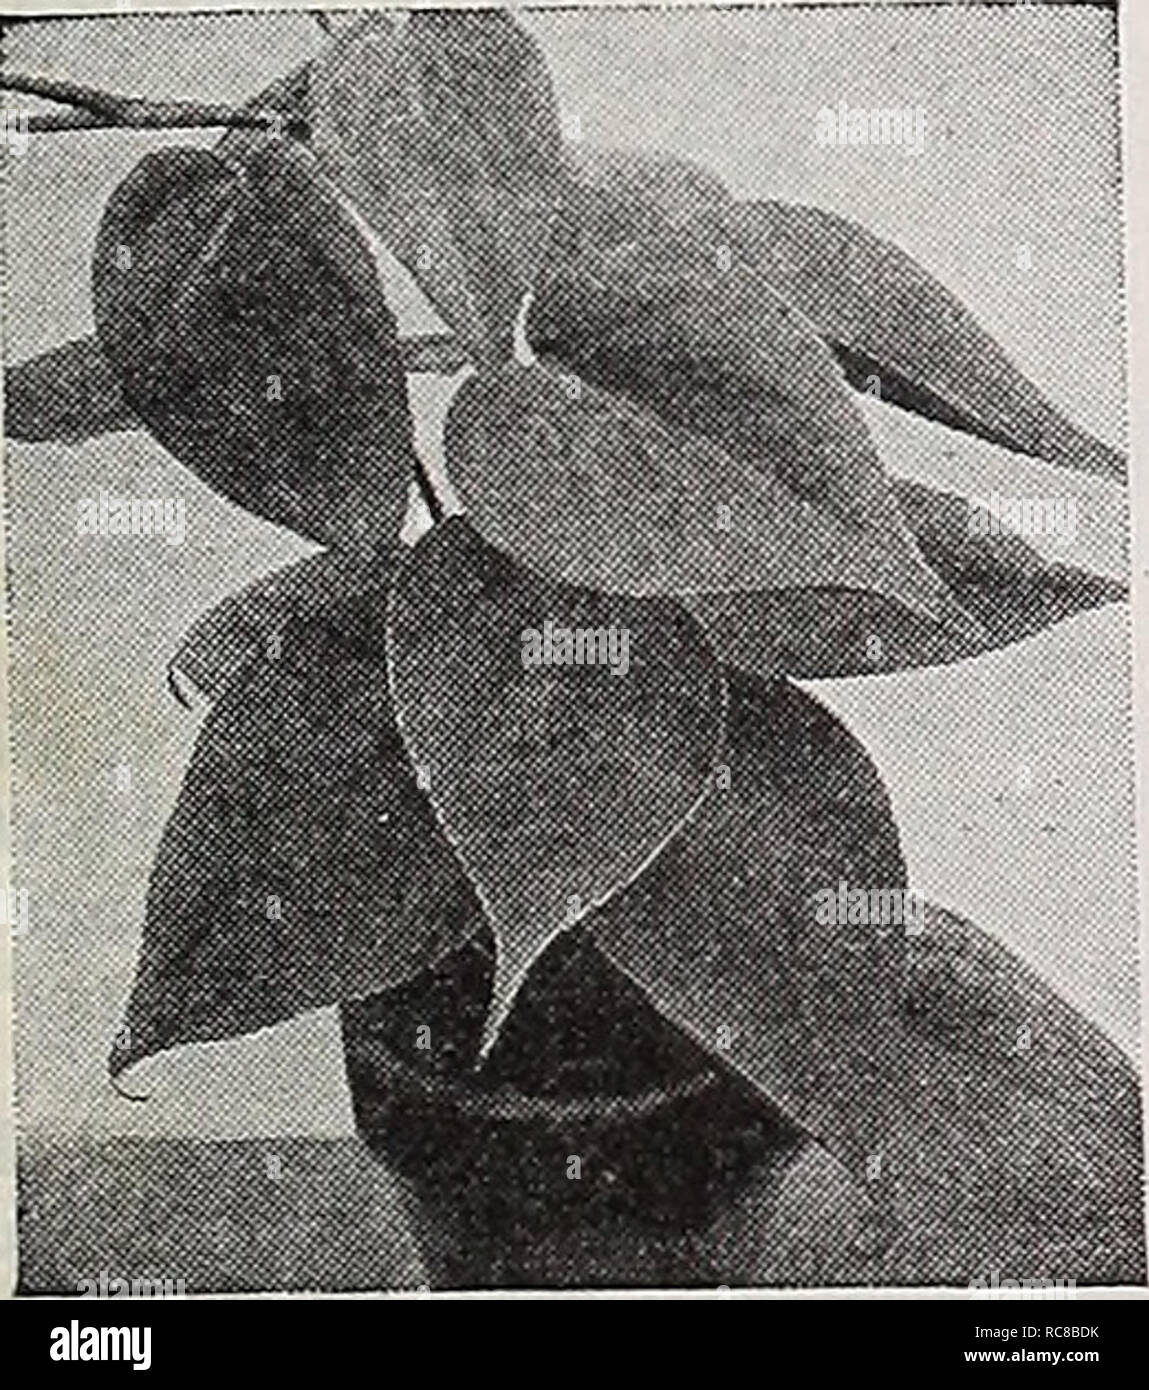 . Dreer's garden book for 1940. Seeds Catalogs; Nursery stock Catalogs; Gardening Equipment and supplies Catalogs; Flowers Seeds Catalogs; Vegetables Seeds Catalogs; Fruit Seeds Catalogs. Vitex macrophylla WliZX—Chaste Tree (T) 26-191 Macrophylla. This graceful shrub though very outstanding in every respect is comparatively little known. It bears showy large lavender-blue flower spikes during the summer and grows more than 10 feet tall unless pruned back. Given ample space it will develop into a truly magnificent specimen of dis- tinctive appearance. Even when not in bloom the attractive palma Stock Photo